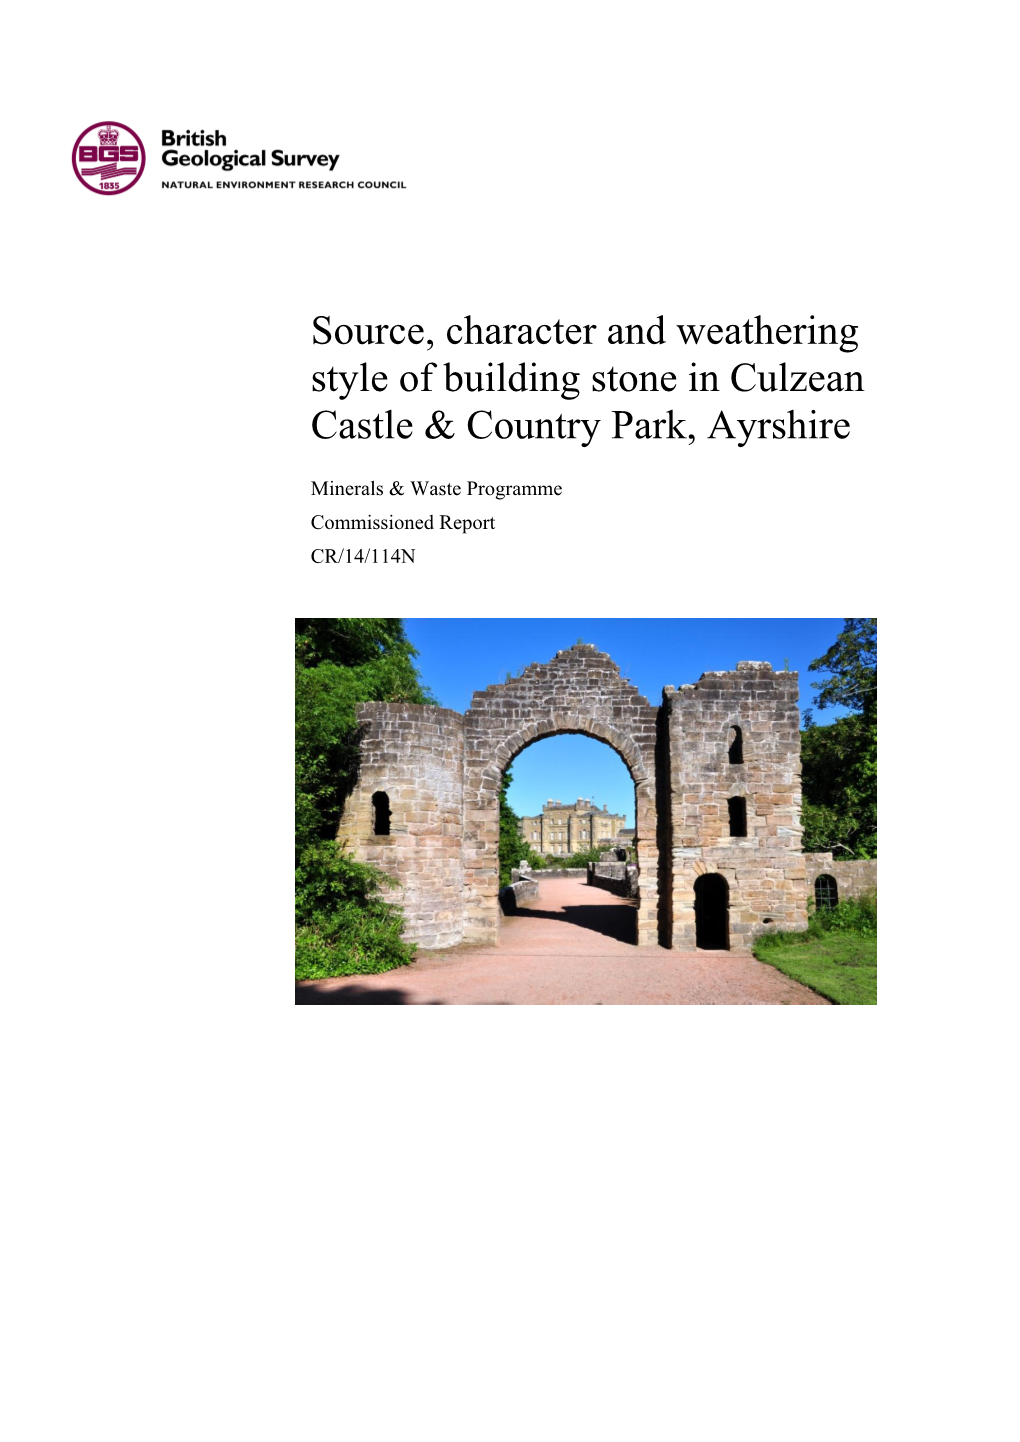 Source, Character and Weathering Style of Building Stone in Culzean Castle & Country Park, Ayrshire